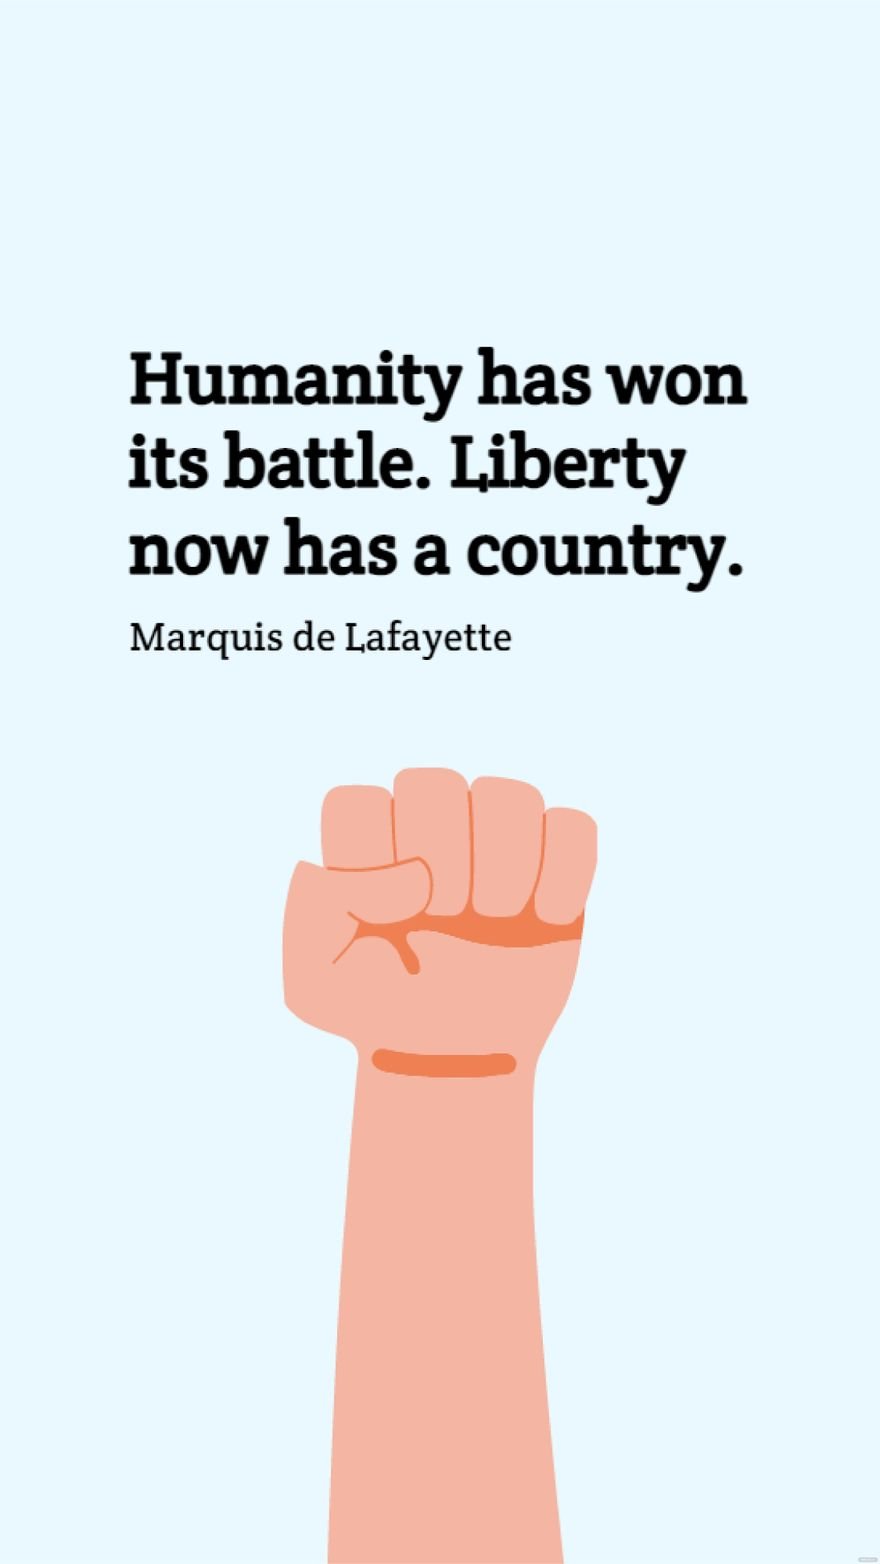 Marquis de Lafayette - Humanity has won its battle. Liberty now has a country.